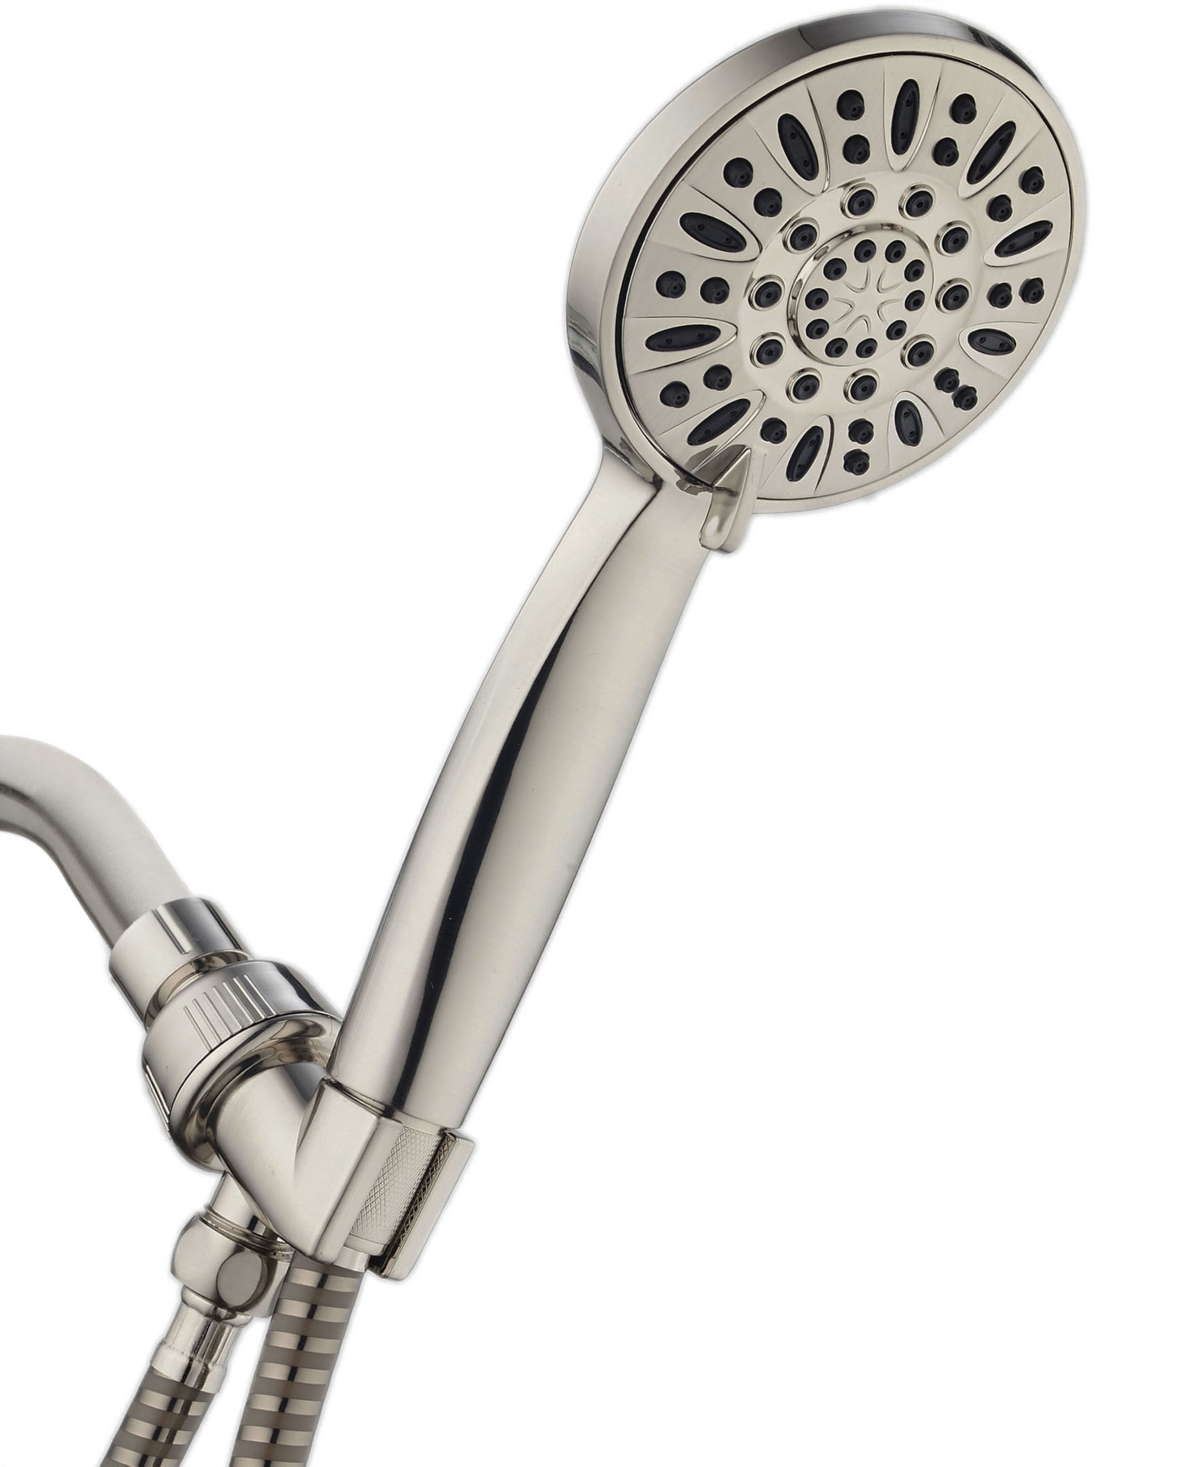 High-Pressure 6-setting Handheld Shower Head with Extra-long 6 Foot Hose - Brushed Nickel